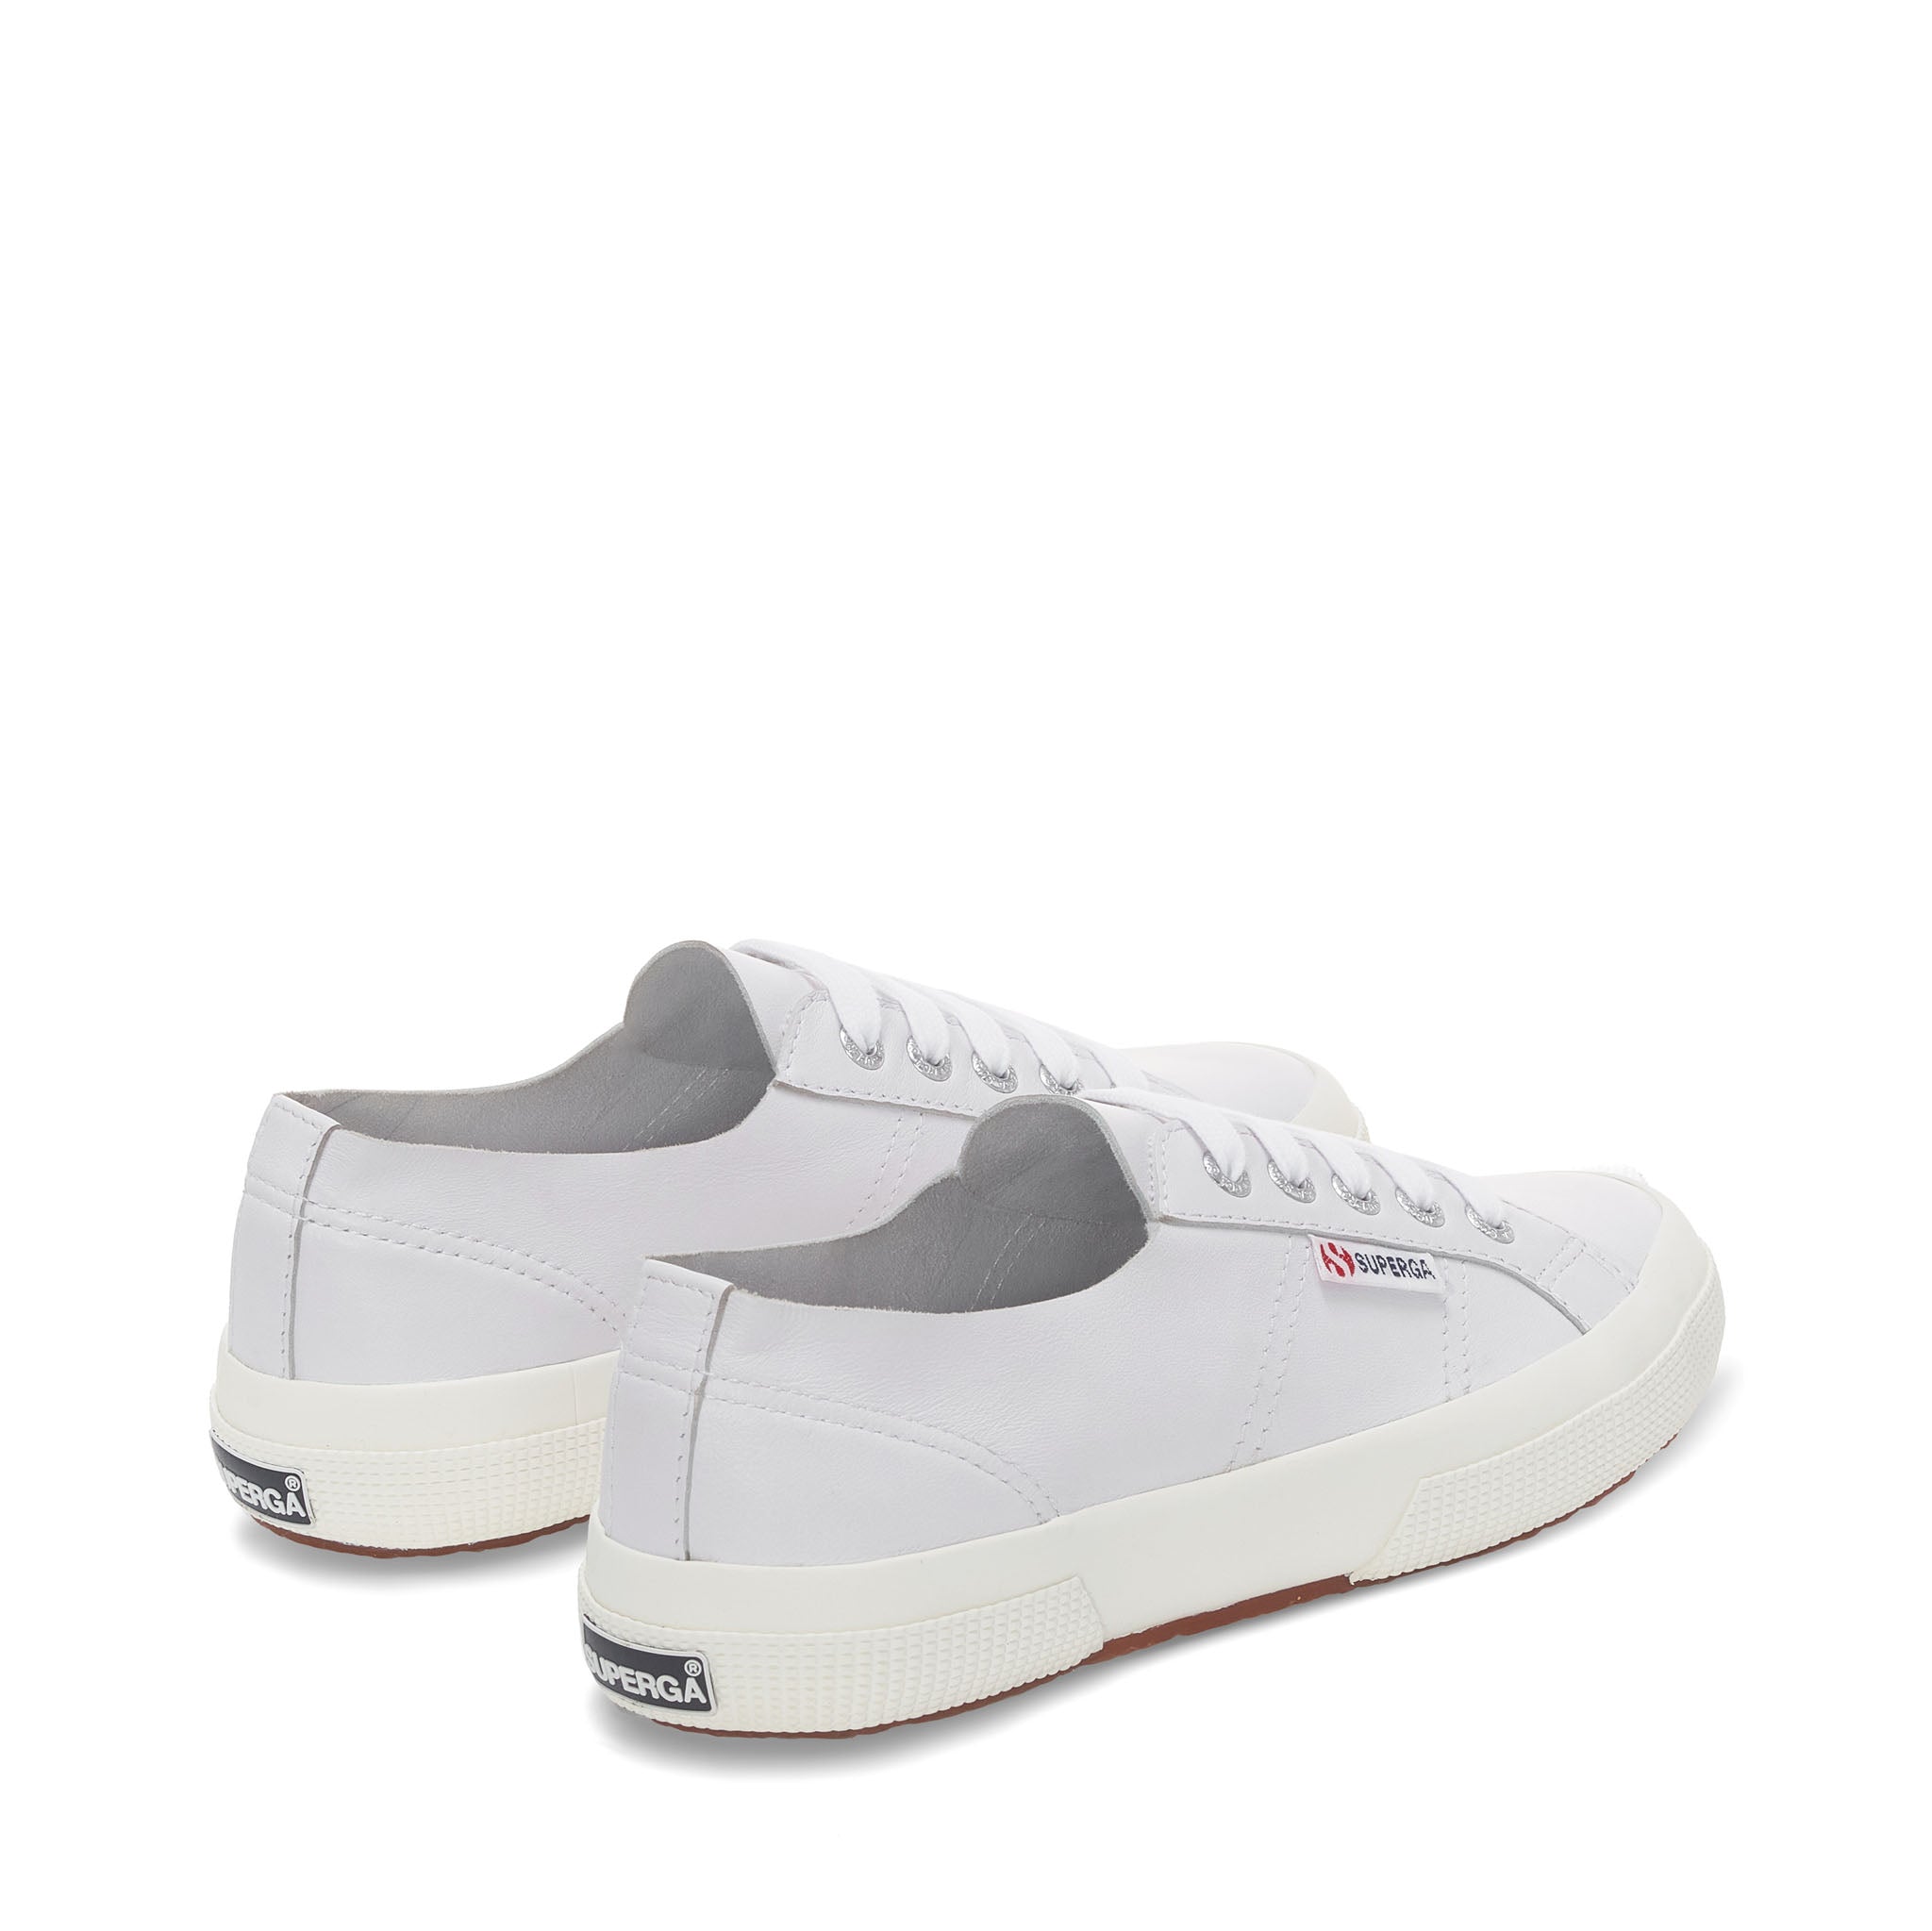 Superga 2750 Unlined Nappa Sneakers - Optical White. Back view.